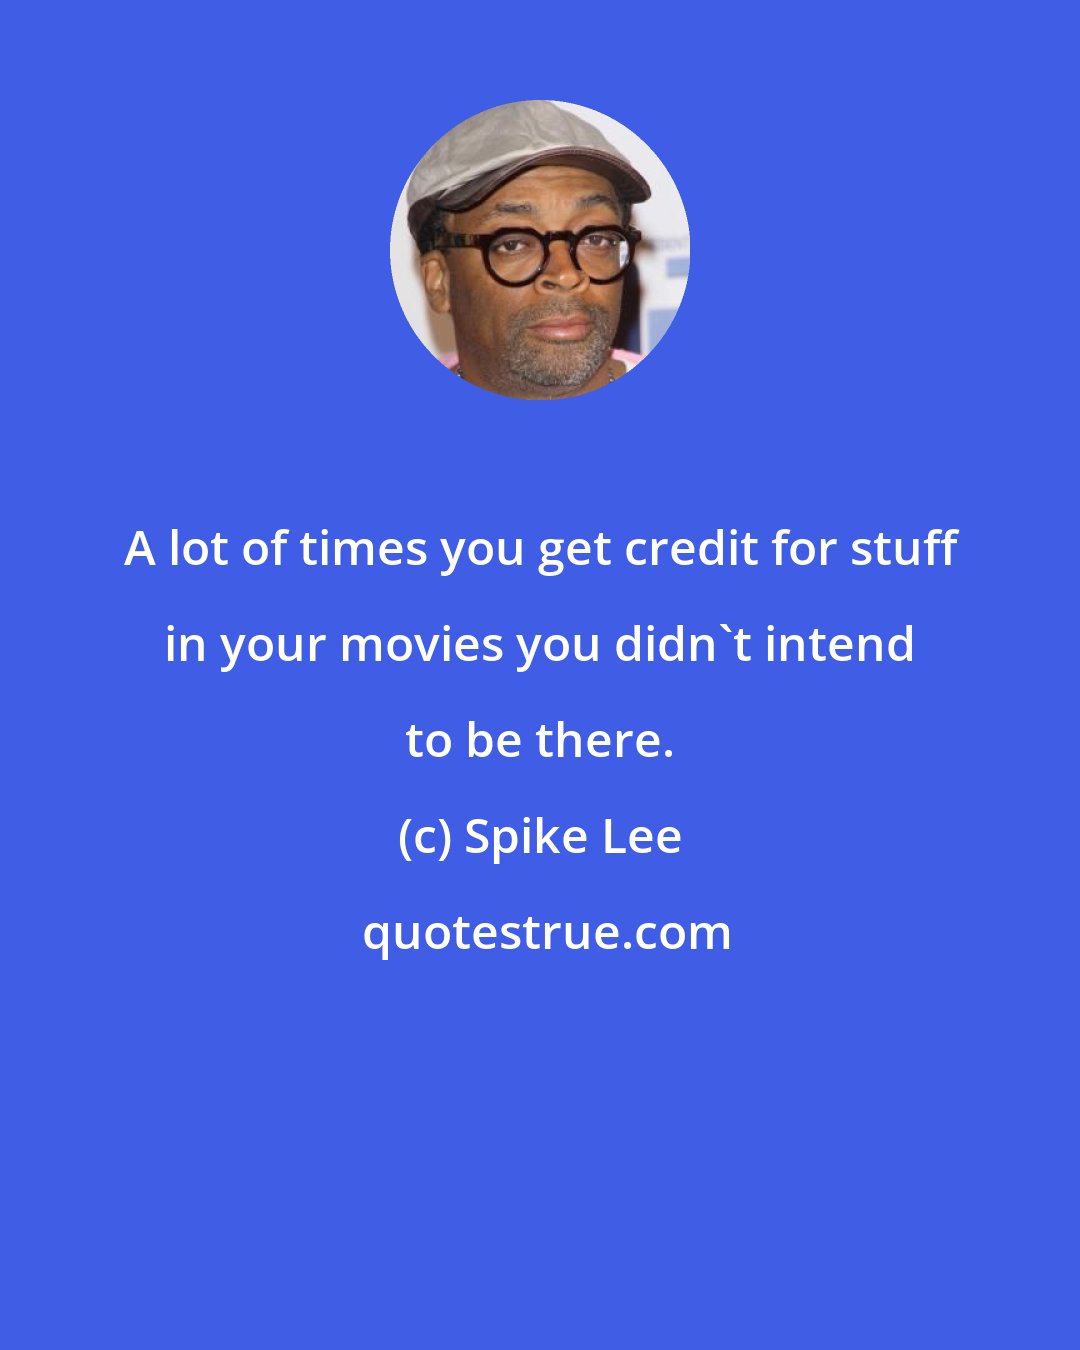 Spike Lee: A lot of times you get credit for stuff in your movies you didn't intend to be there.